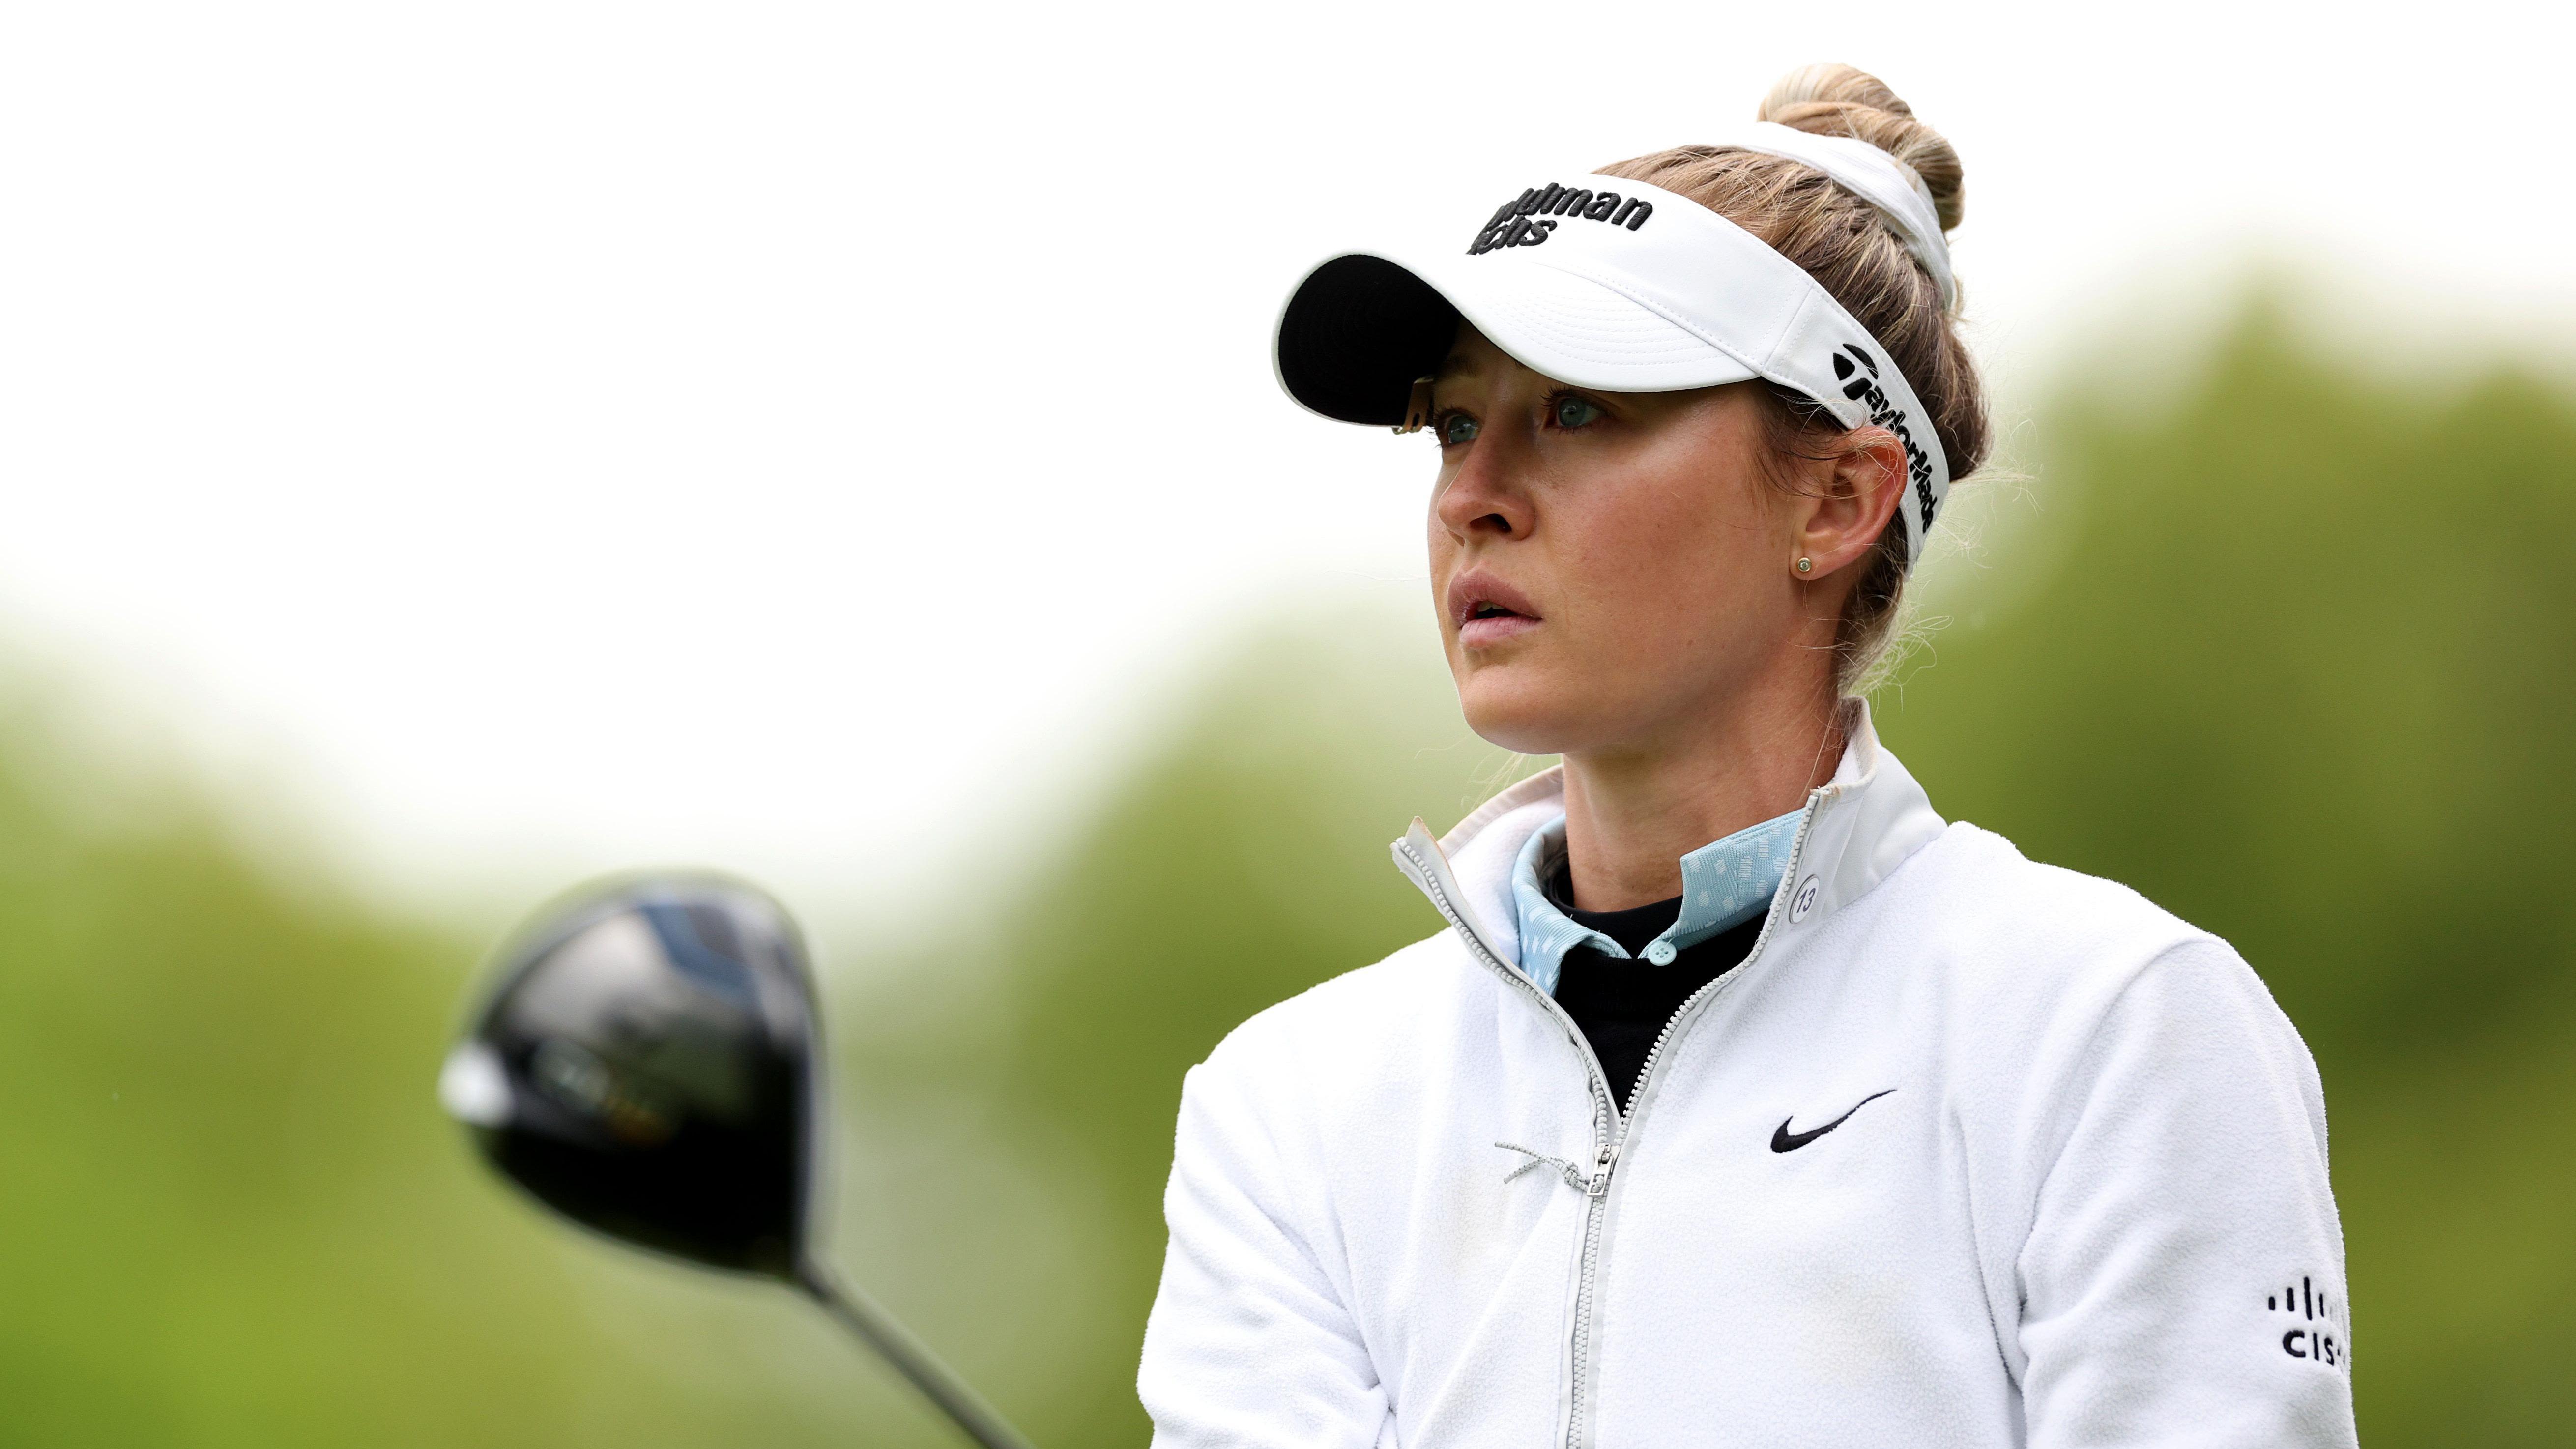 Korda closes on lead as she chases record title